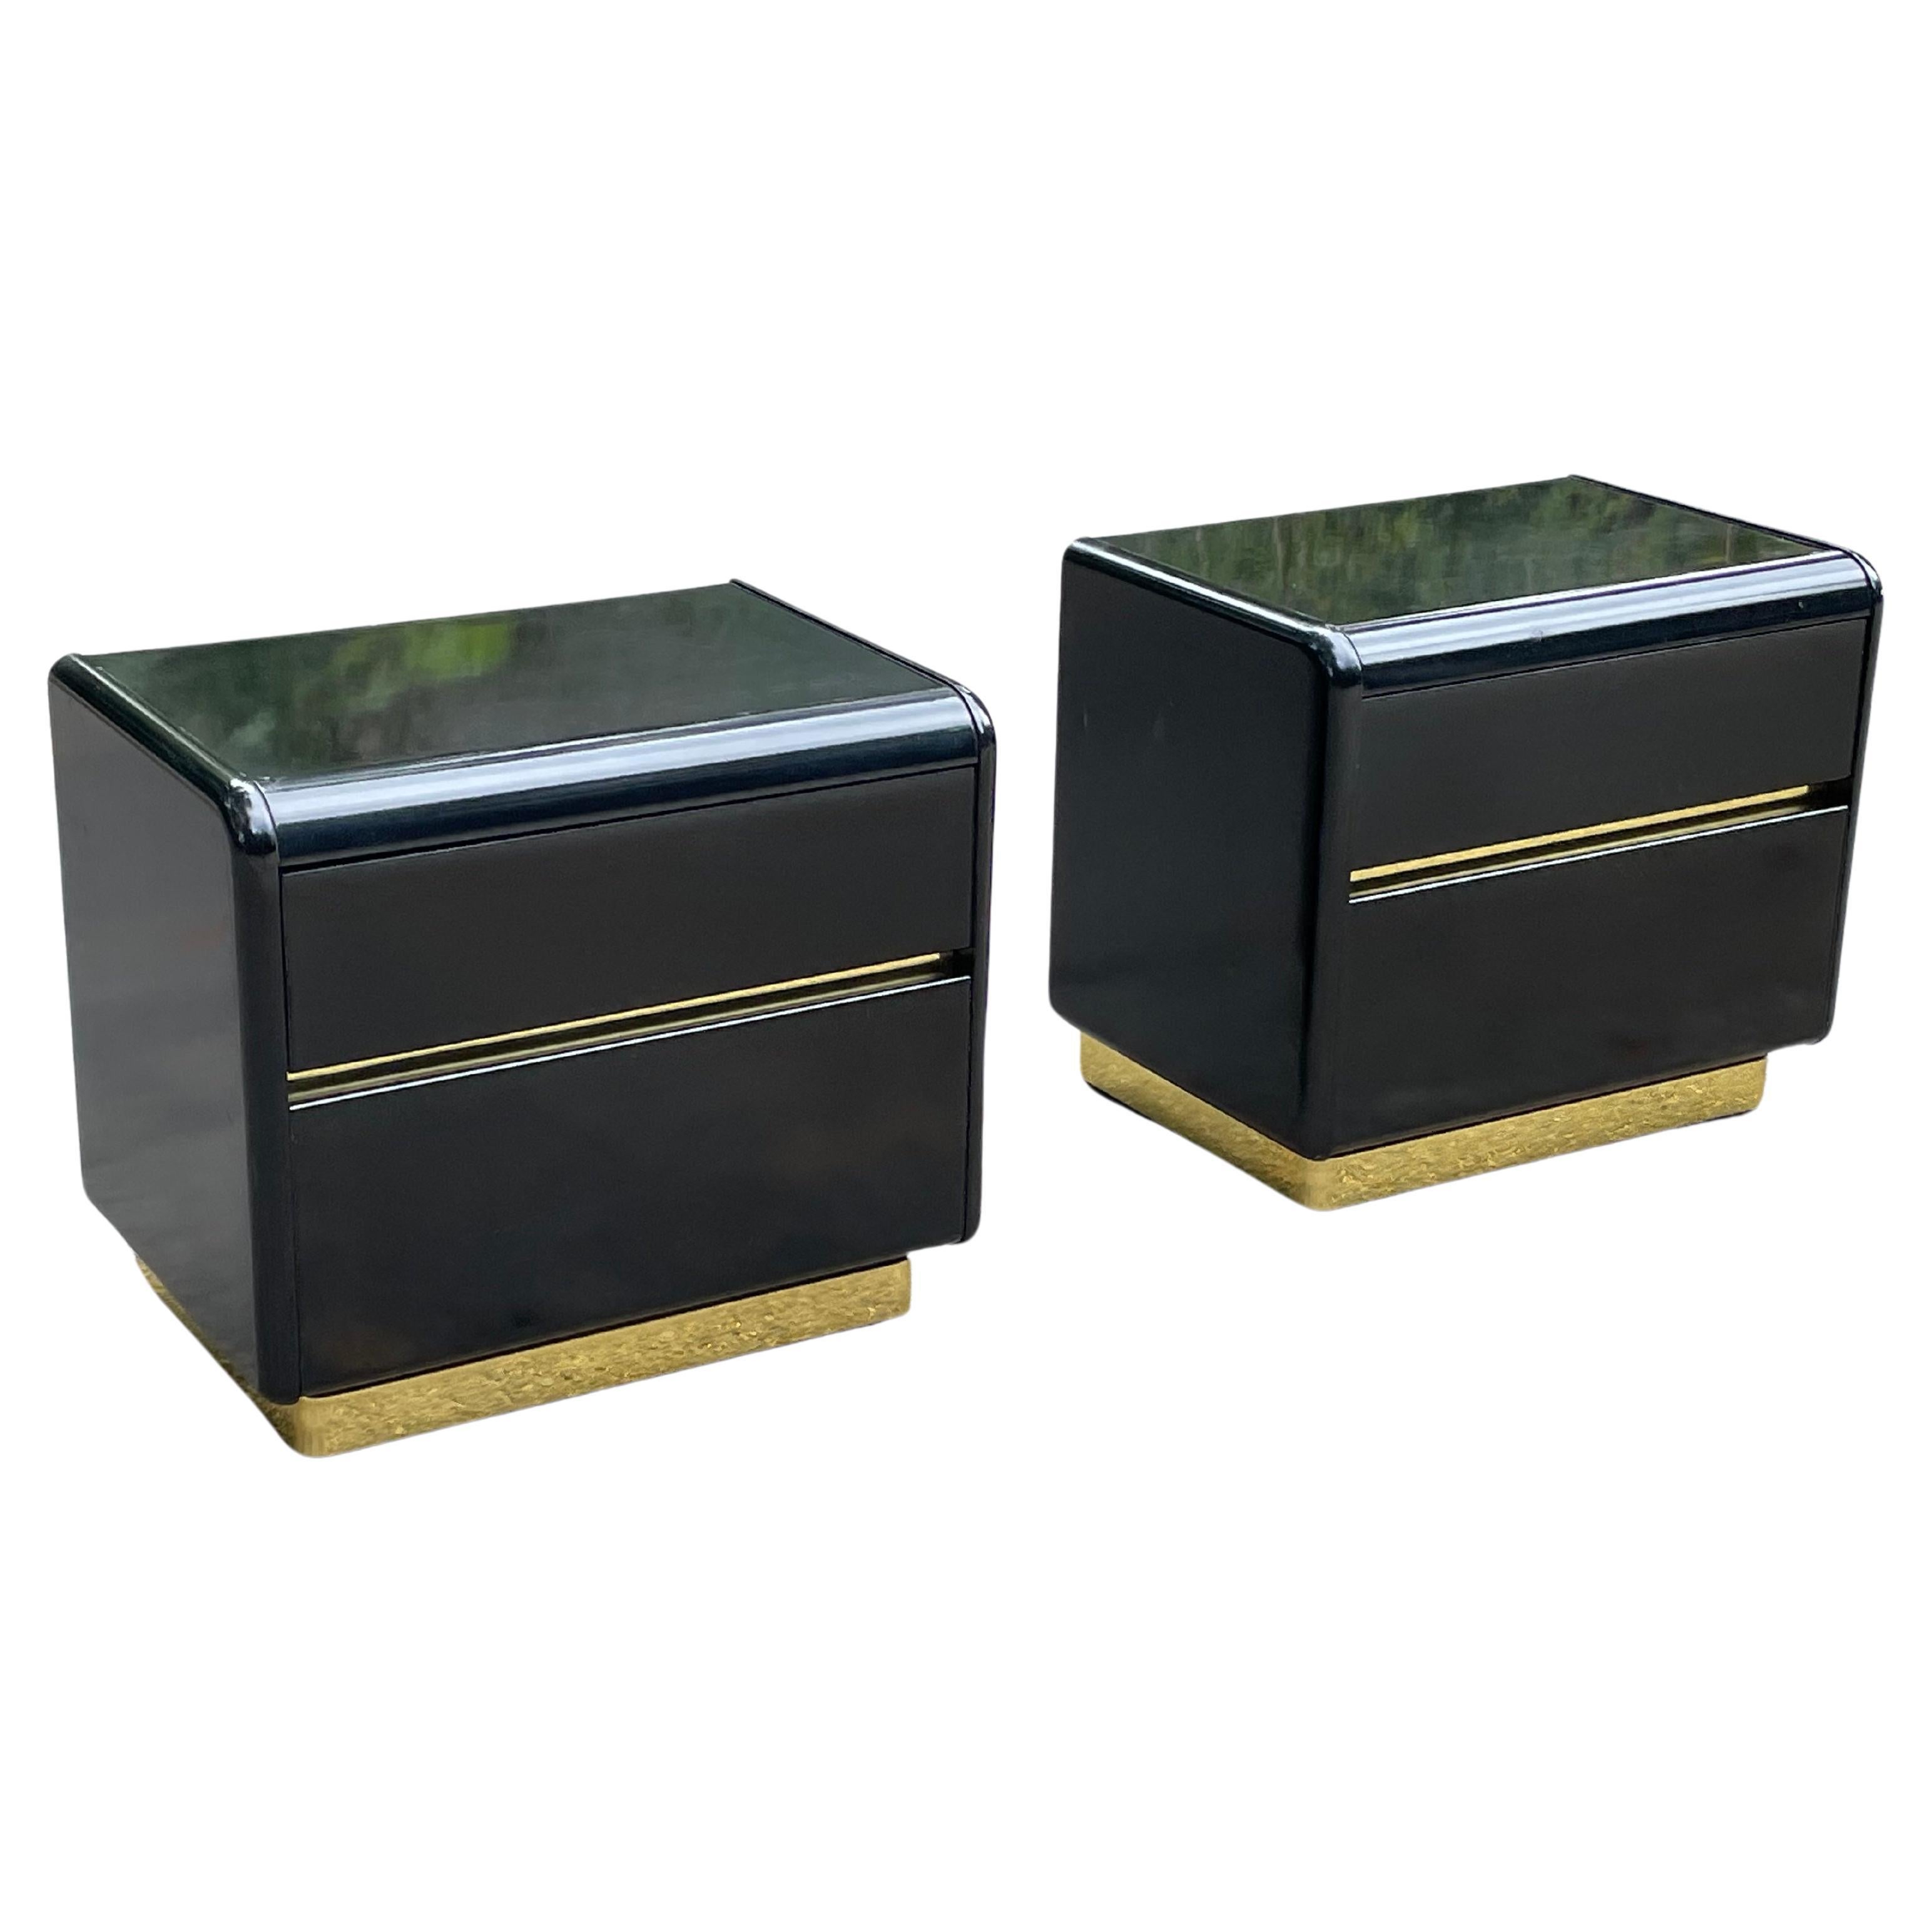 Pair of mid-century 80s black lacquer & brass nightstands by Lane. Gorgeous post modern design. The black lacquer is smooth. The brass glows.

Two drawers on each. Signed with label inside top drawer.

Very good vintage condition. Very minor scuffs